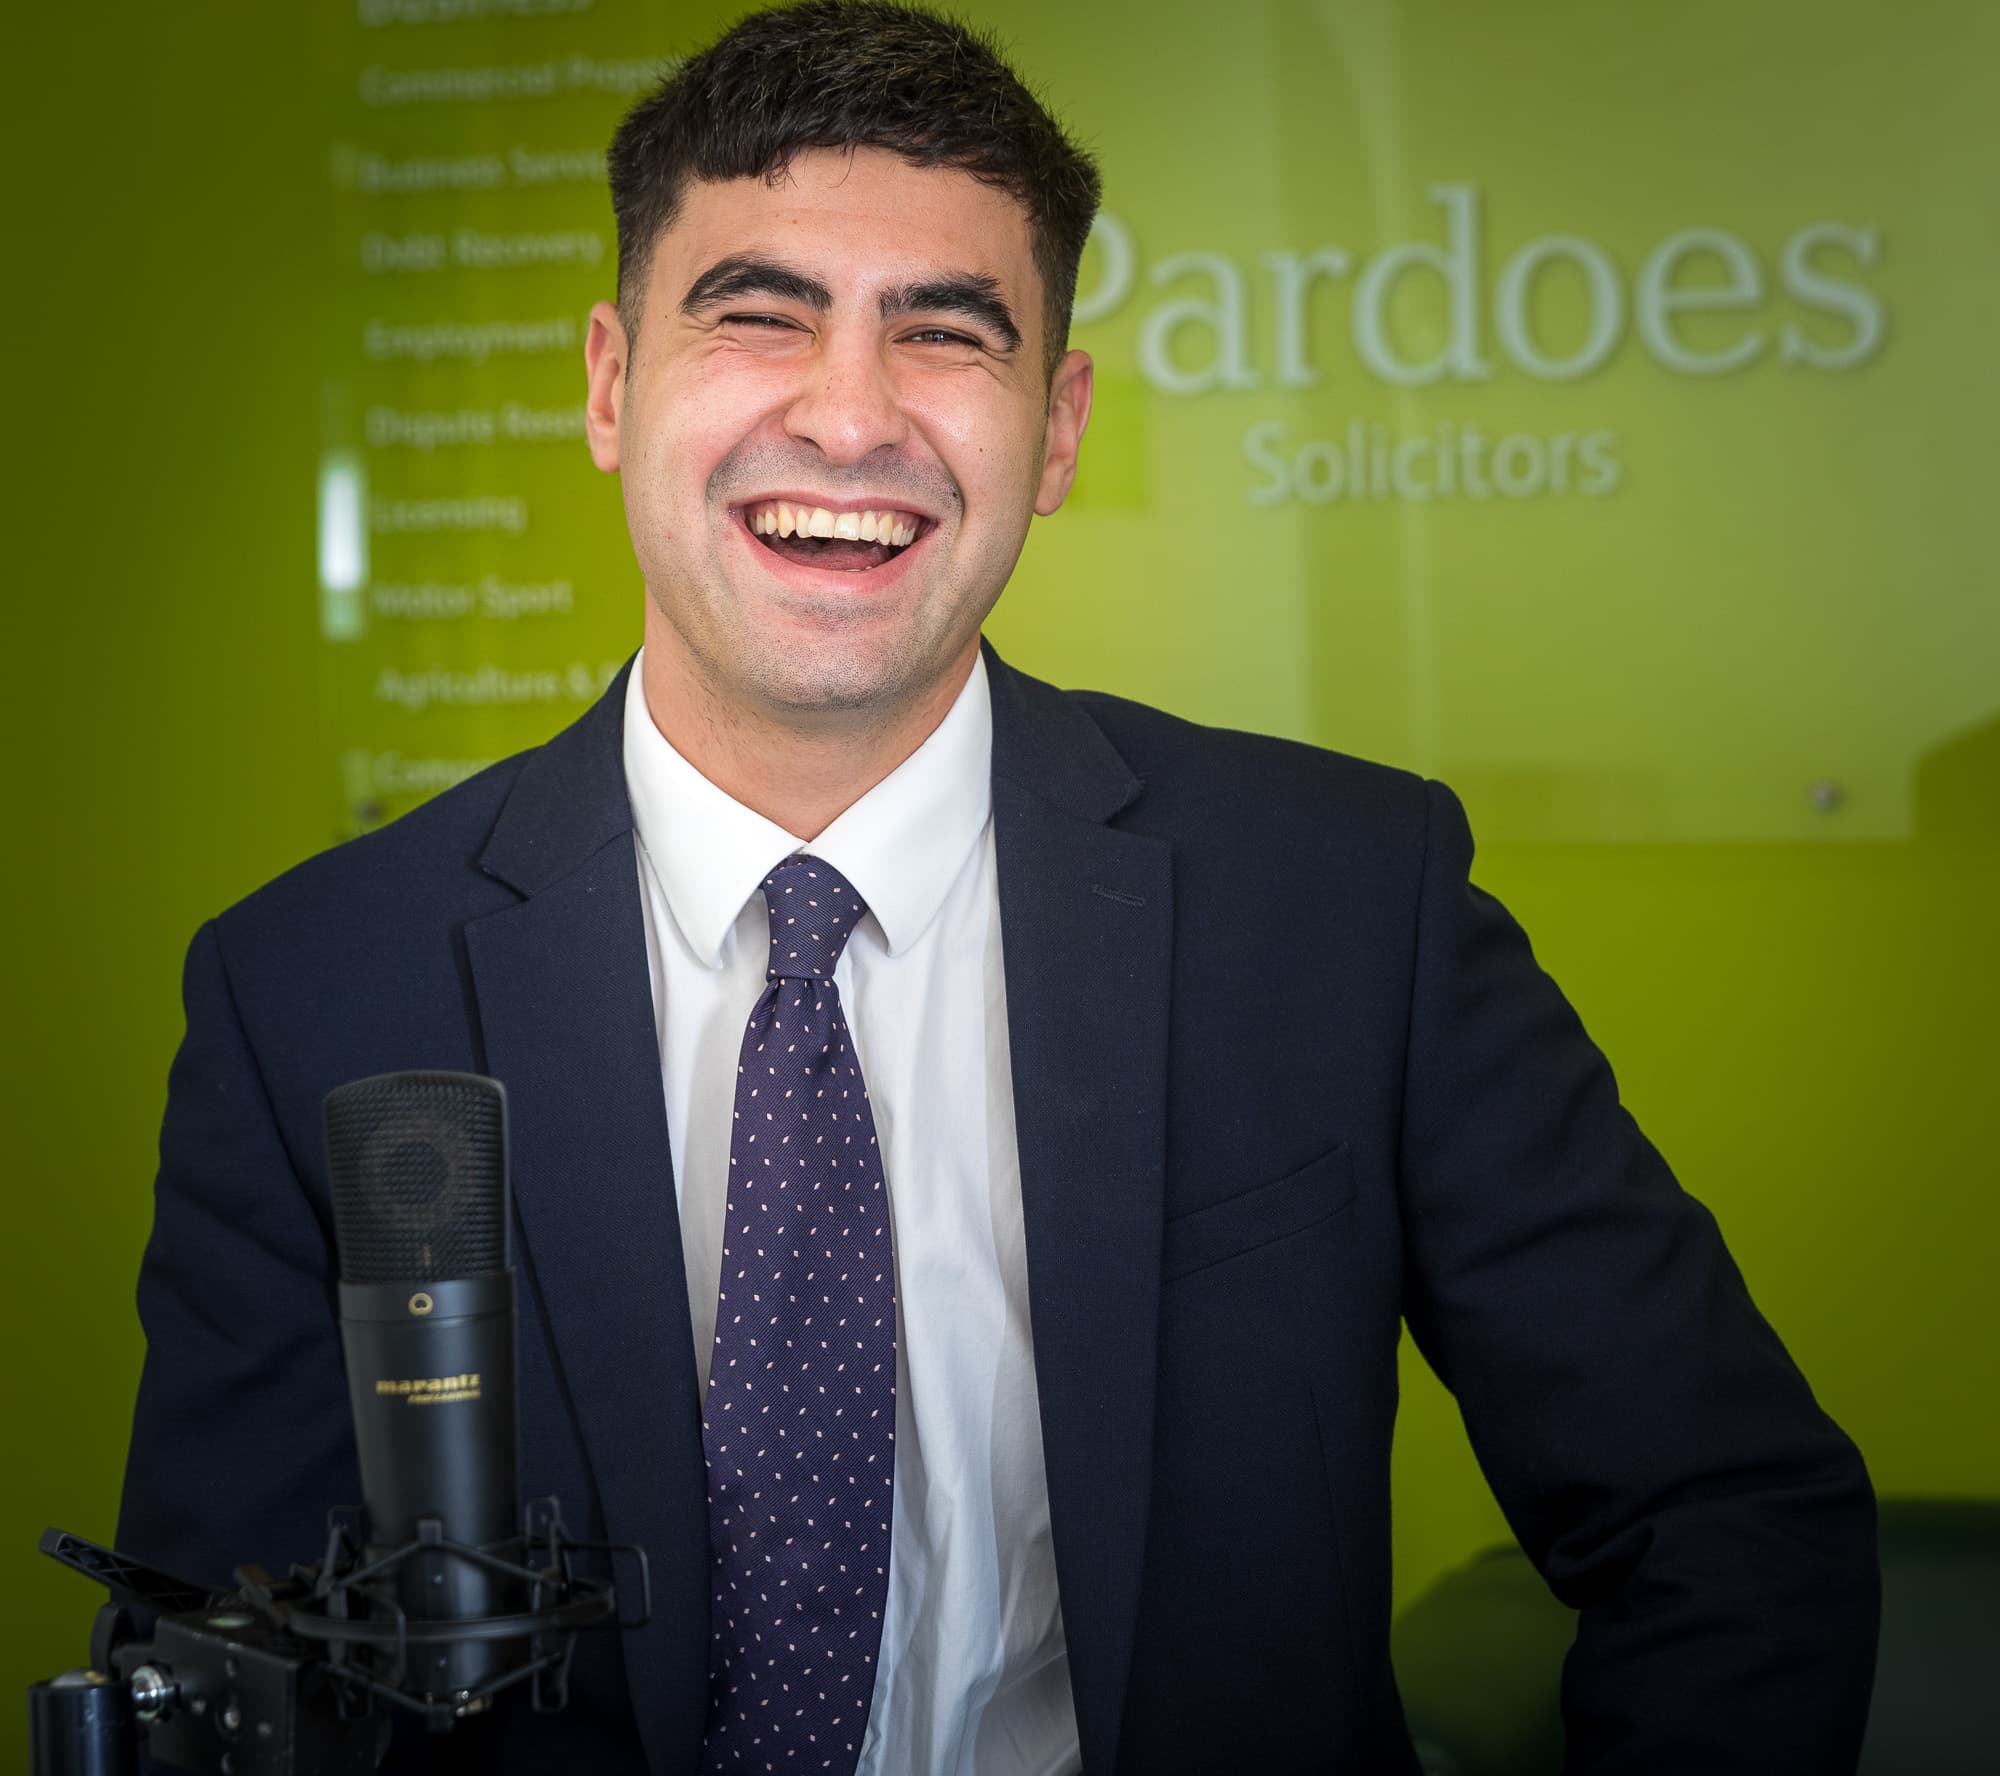 Pardoes-solicitors-podcast